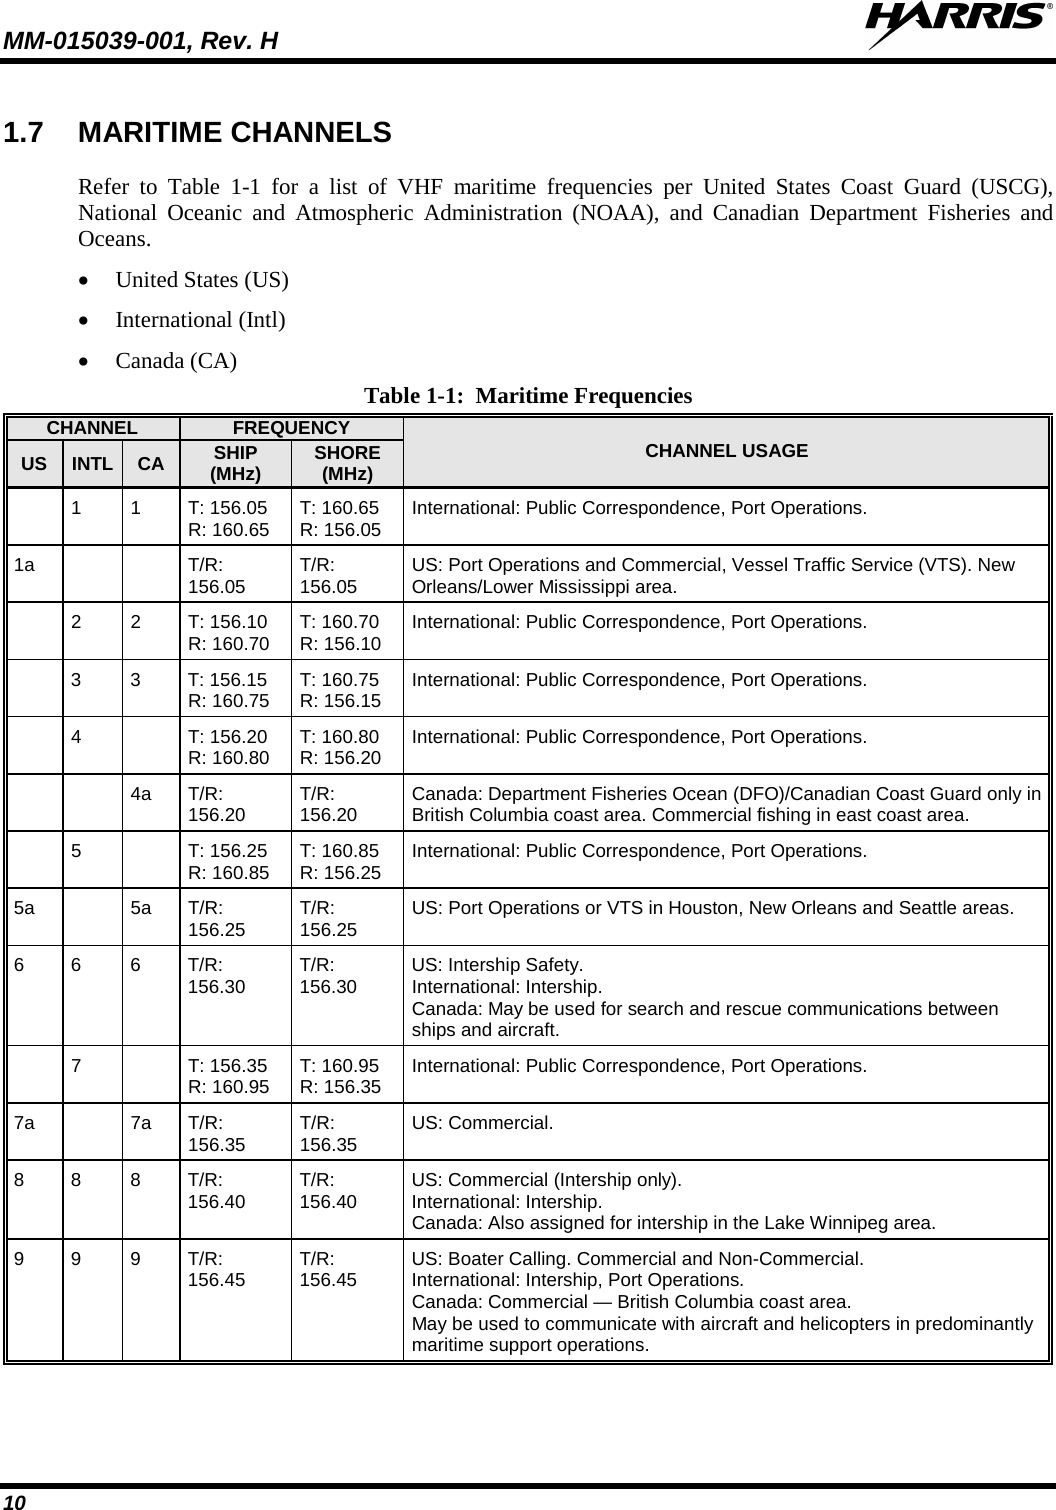 MM-015039-001, Rev. H     10 1.7 MARITIME CHANNELS Refer to Table  1-1  for a list of VHF  maritime frequencies per United States Coast Guard (USCG), National Oceanic and Atmospheric Administration (NOAA), and Canadian Department Fisheries and Oceans. • United States (US) • International (Intl) • Canada (CA) Table 1-1:  Maritime Frequencies CHANNEL FREQUENCY CHANNEL USAGE US INTL CA SHIP (MHz) SHORE (MHz)  1 1 T: 156.05 R: 160.65 T: 160.65 R: 156.05 International: Public Correspondence, Port Operations. 1a      T/R: 156.05 T/R: 156.05 US: Port Operations and Commercial, Vessel Traffic Service (VTS). New Orleans/Lower Mississippi area.   2 2 T: 156.10 R: 160.70 T: 160.70  R: 156.10 International: Public Correspondence, Port Operations.   3  3  T: 156.15 R: 160.75 T: 160.75 R: 156.15 International: Public Correspondence, Port Operations.  4  T: 156.20  R: 160.80 T: 160.80  R: 156.20 International: Public Correspondence, Port Operations.   4a T/R: 156.20 T/R: 156.20 Canada: Department Fisheries Ocean (DFO)/Canadian Coast Guard only in British Columbia coast area. Commercial fishing in east coast area.  5  T: 156.25  R: 160.85 T: 160.85  R: 156.25 International: Public Correspondence, Port Operations. 5a  5a T/R: 156.25 T/R: 156.25 US: Port Operations or VTS in Houston, New Orleans and Seattle areas. 6  6  6  T/R: 156.30 T/R: 156.30 US: Intership Safety. International: Intership. Canada: May be used for search and rescue communications between ships and aircraft.  7  T: 156.35  R: 160.95 T: 160.95  R: 156.35 International: Public Correspondence, Port Operations. 7a  7a T/R: 156.35 T/R: 156.35 US: Commercial. 8  8  8  T/R: 156.40 T/R: 156.40 US: Commercial (Intership only). International: Intership. Canada: Also assigned for intership in the Lake Winnipeg area. 9  9  9  T/R: 156.45 T/R: 156.45 US: Boater Calling. Commercial and Non-Commercial. International: Intership, Port Operations. Canada: Commercial — British Columbia coast area. May be used to communicate with aircraft and helicopters in predominantly maritime support operations. 